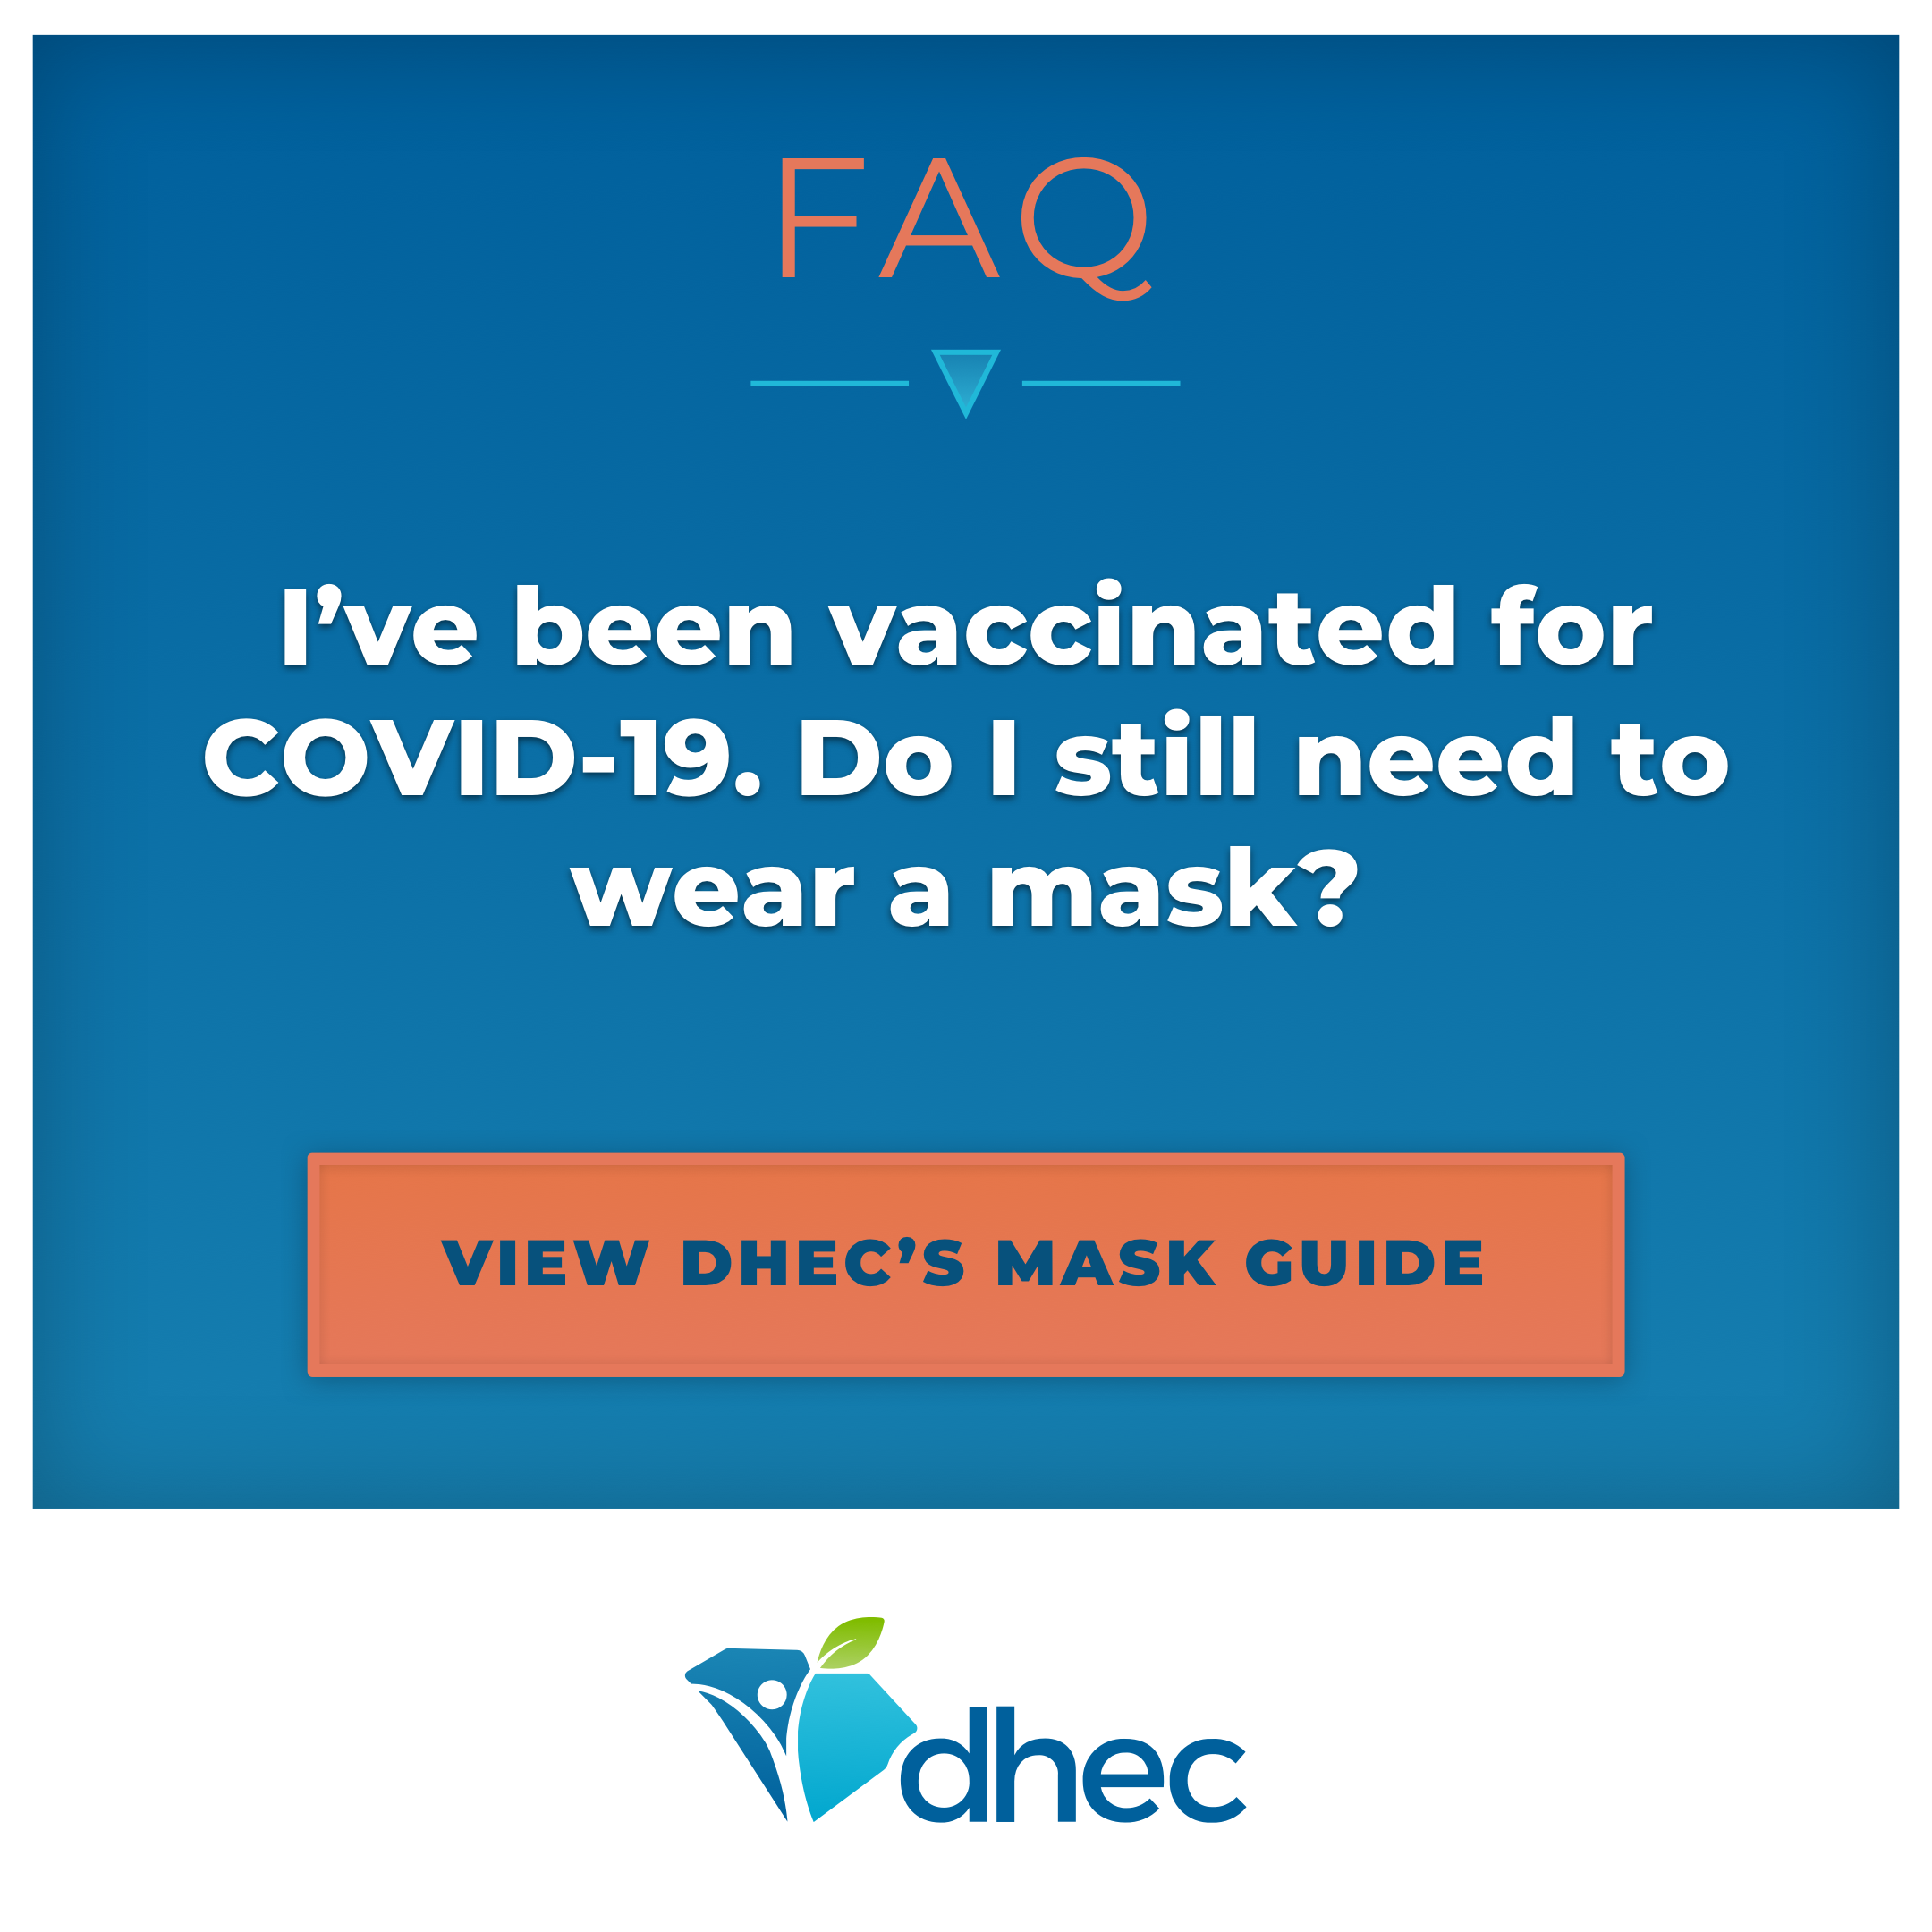 I've been vaccinated. Do I still need to wear a mask?